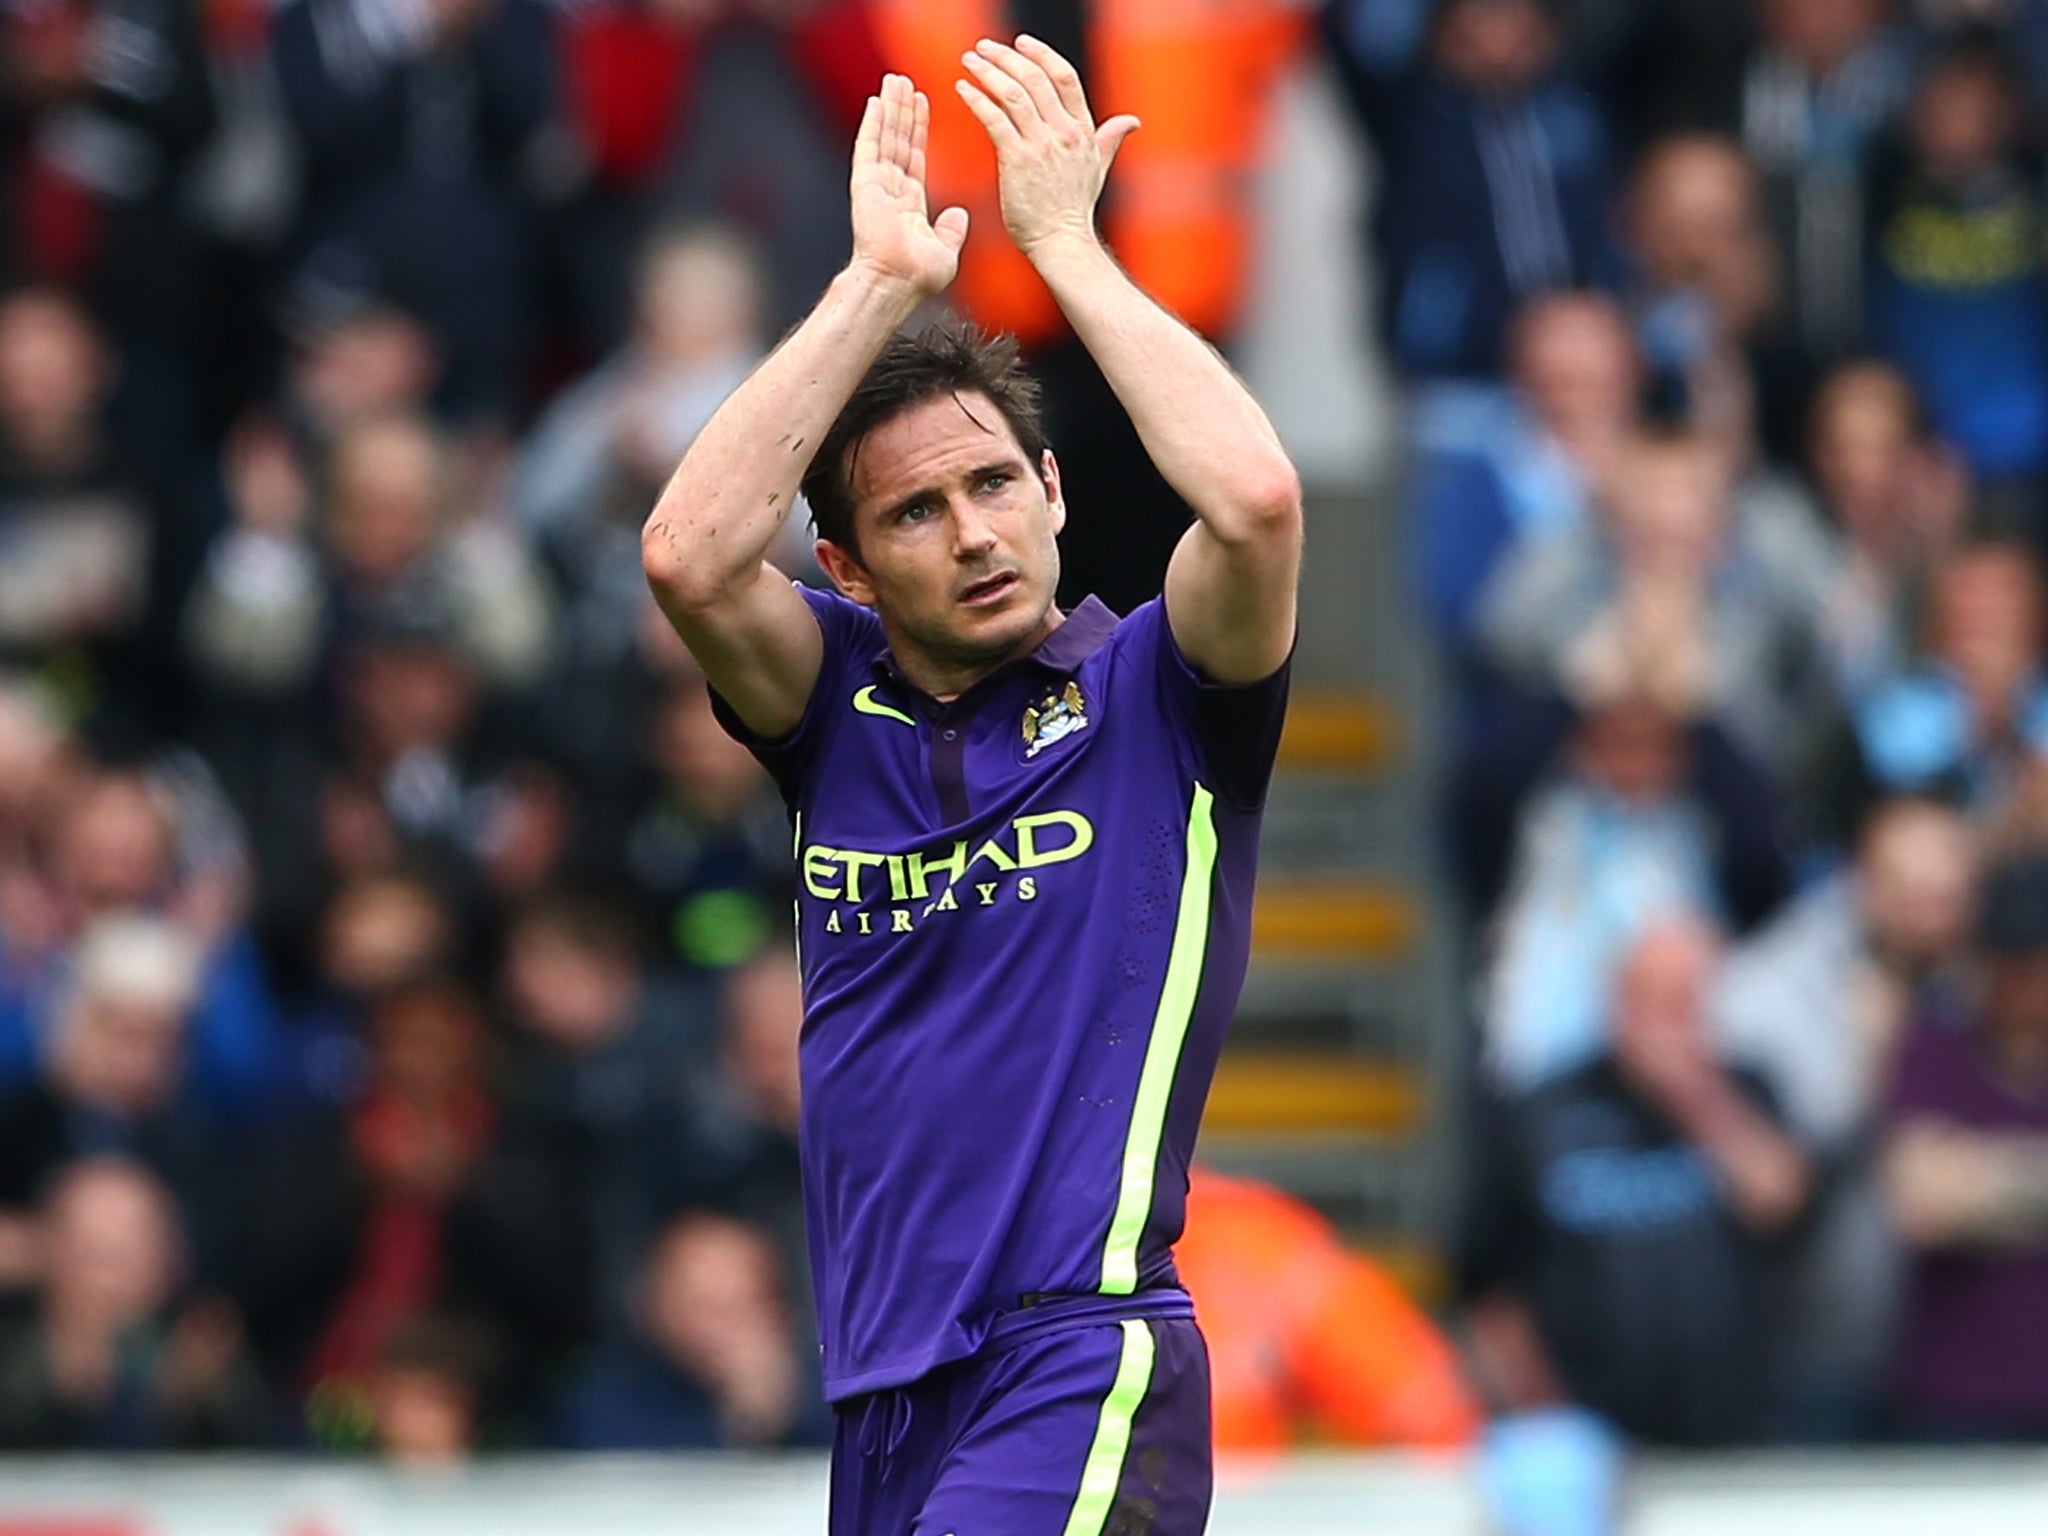 Frank Lampard will play his last game for Manchester City against Southampton